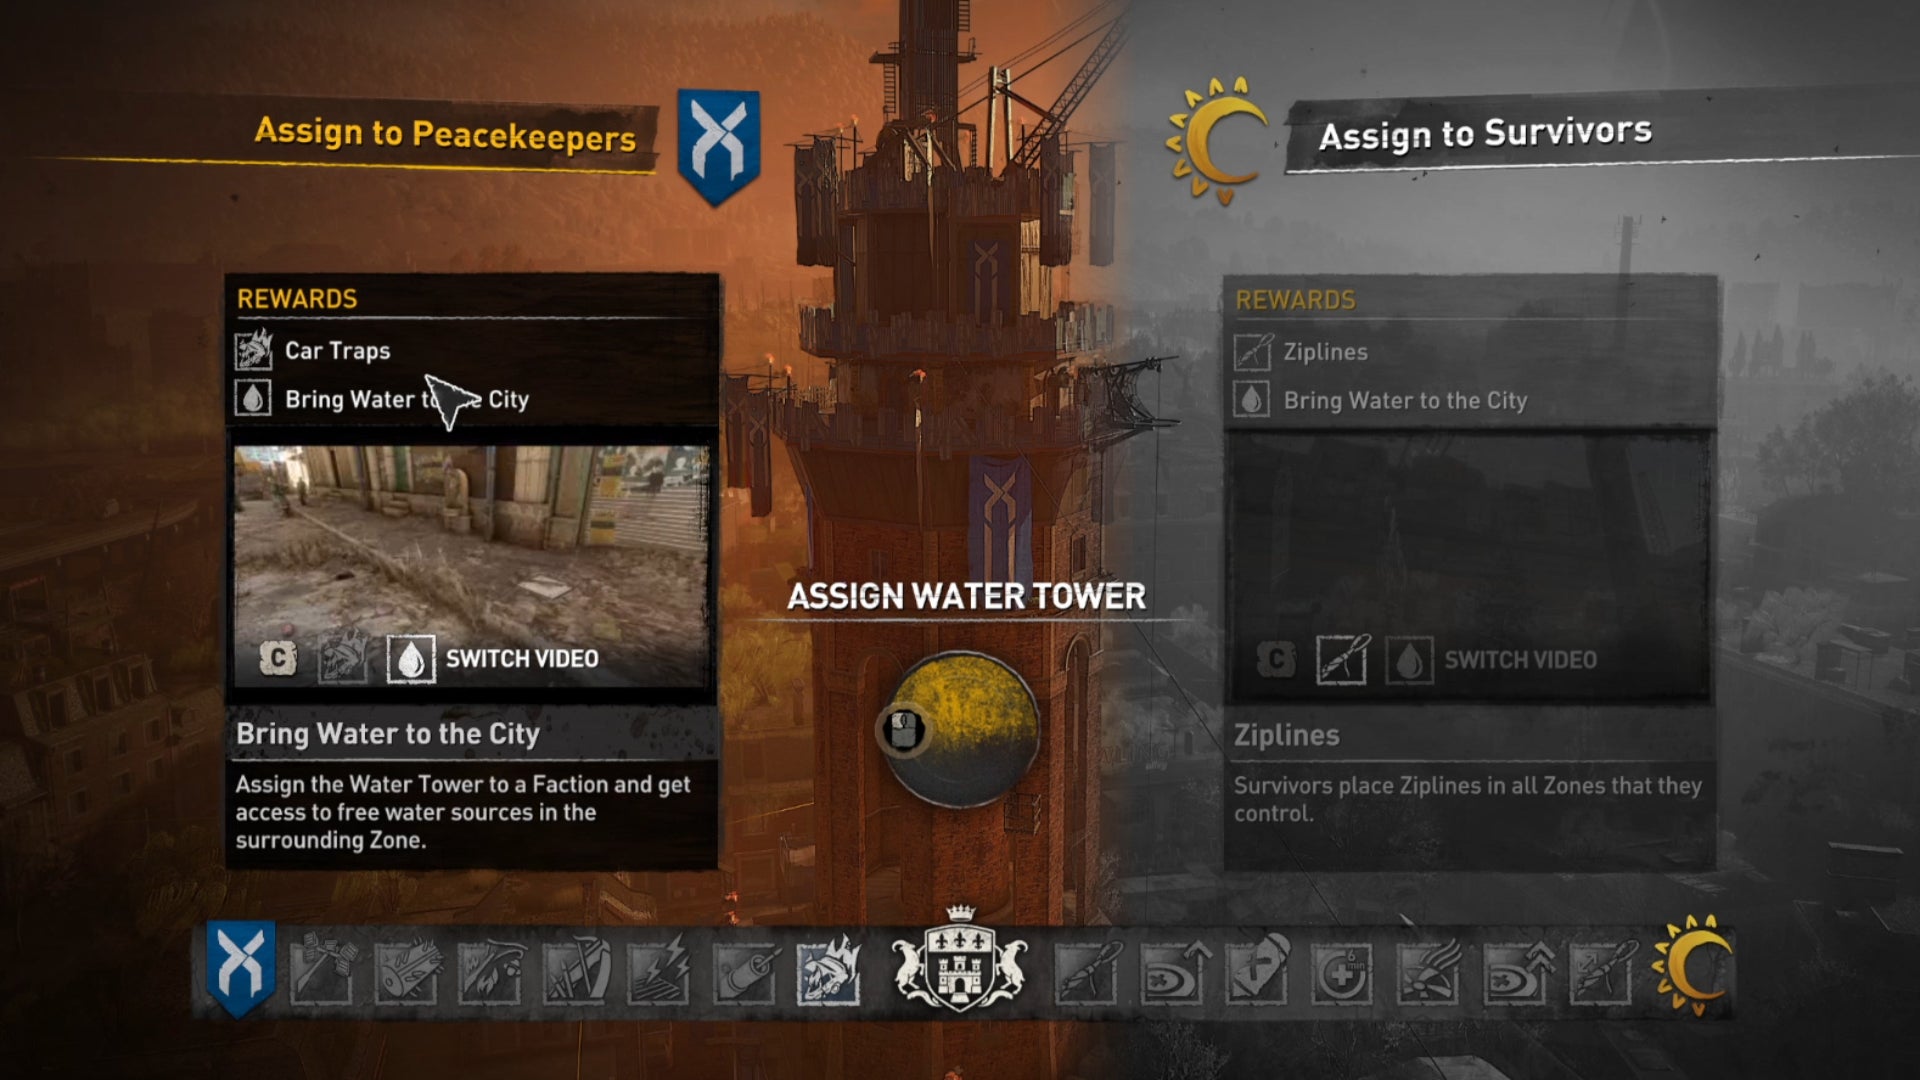 The Facility alignment screen in Dying Light 2, where the player must choose who to give a zone of the map to: Peacekeepers, or Survivors.